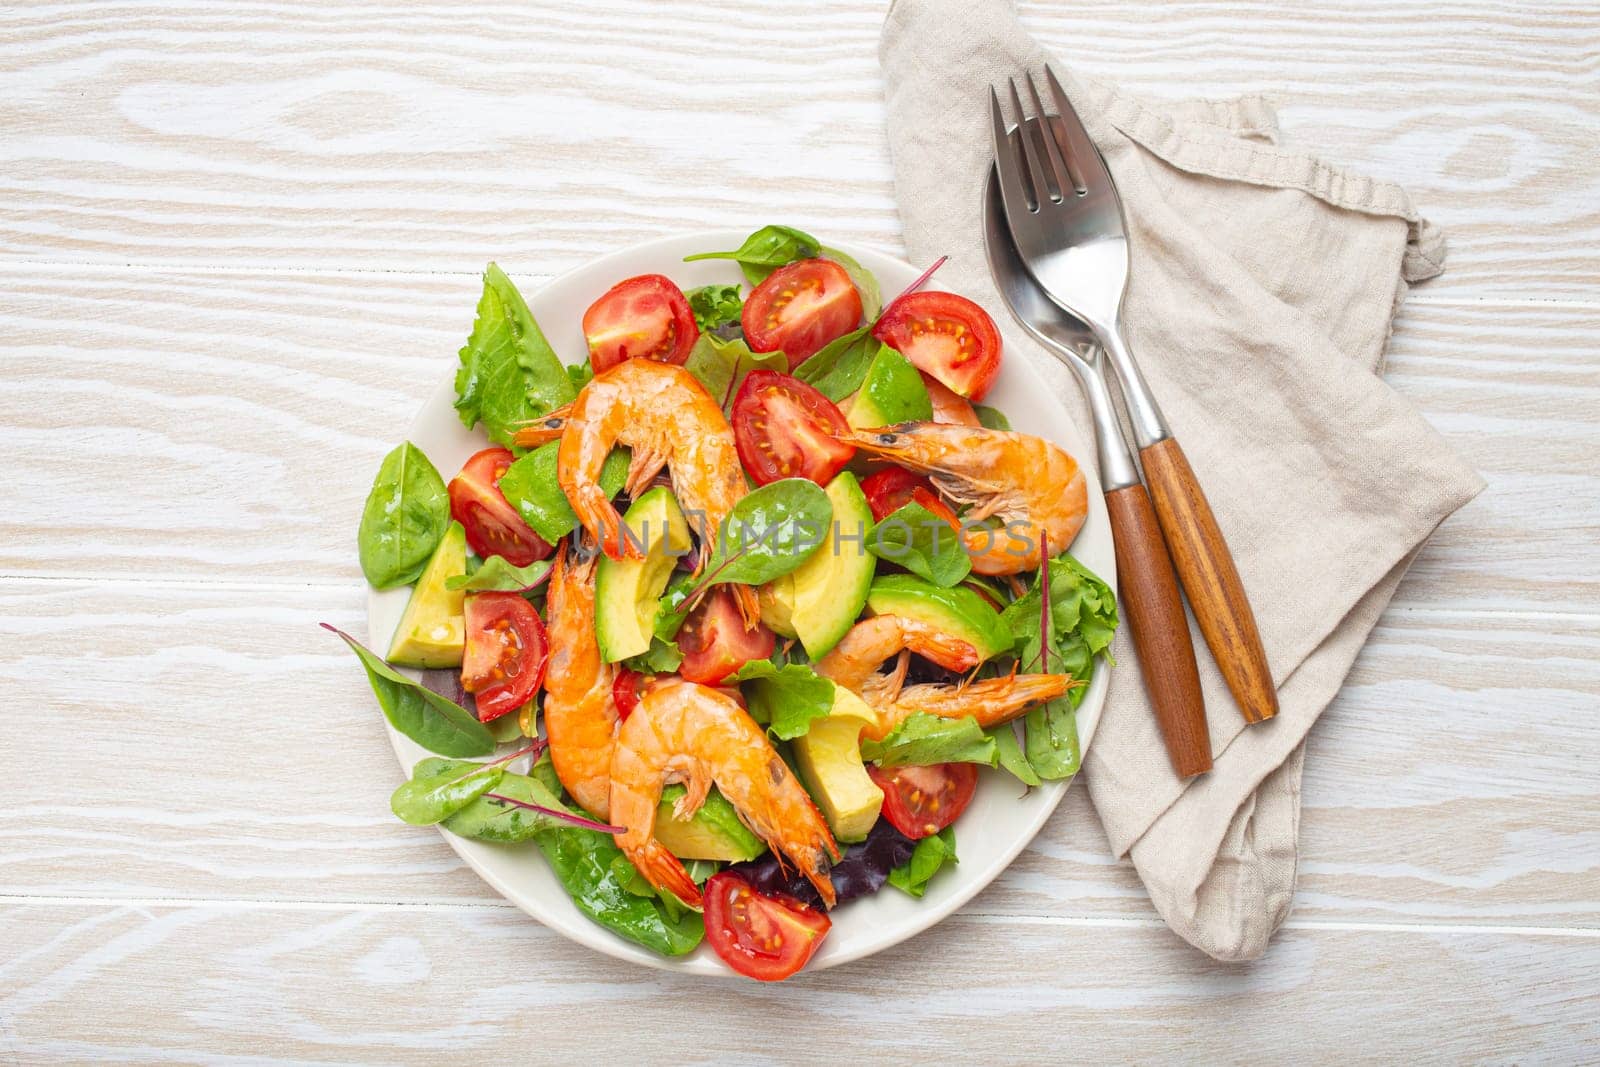 Healthy salad with grilled shrimps, avocado, cherry tomatoes and green leaves on white plate with cutlery on white wooden rustic background top view. Clean eating, nutrition and dieting concept. by its_al_dente